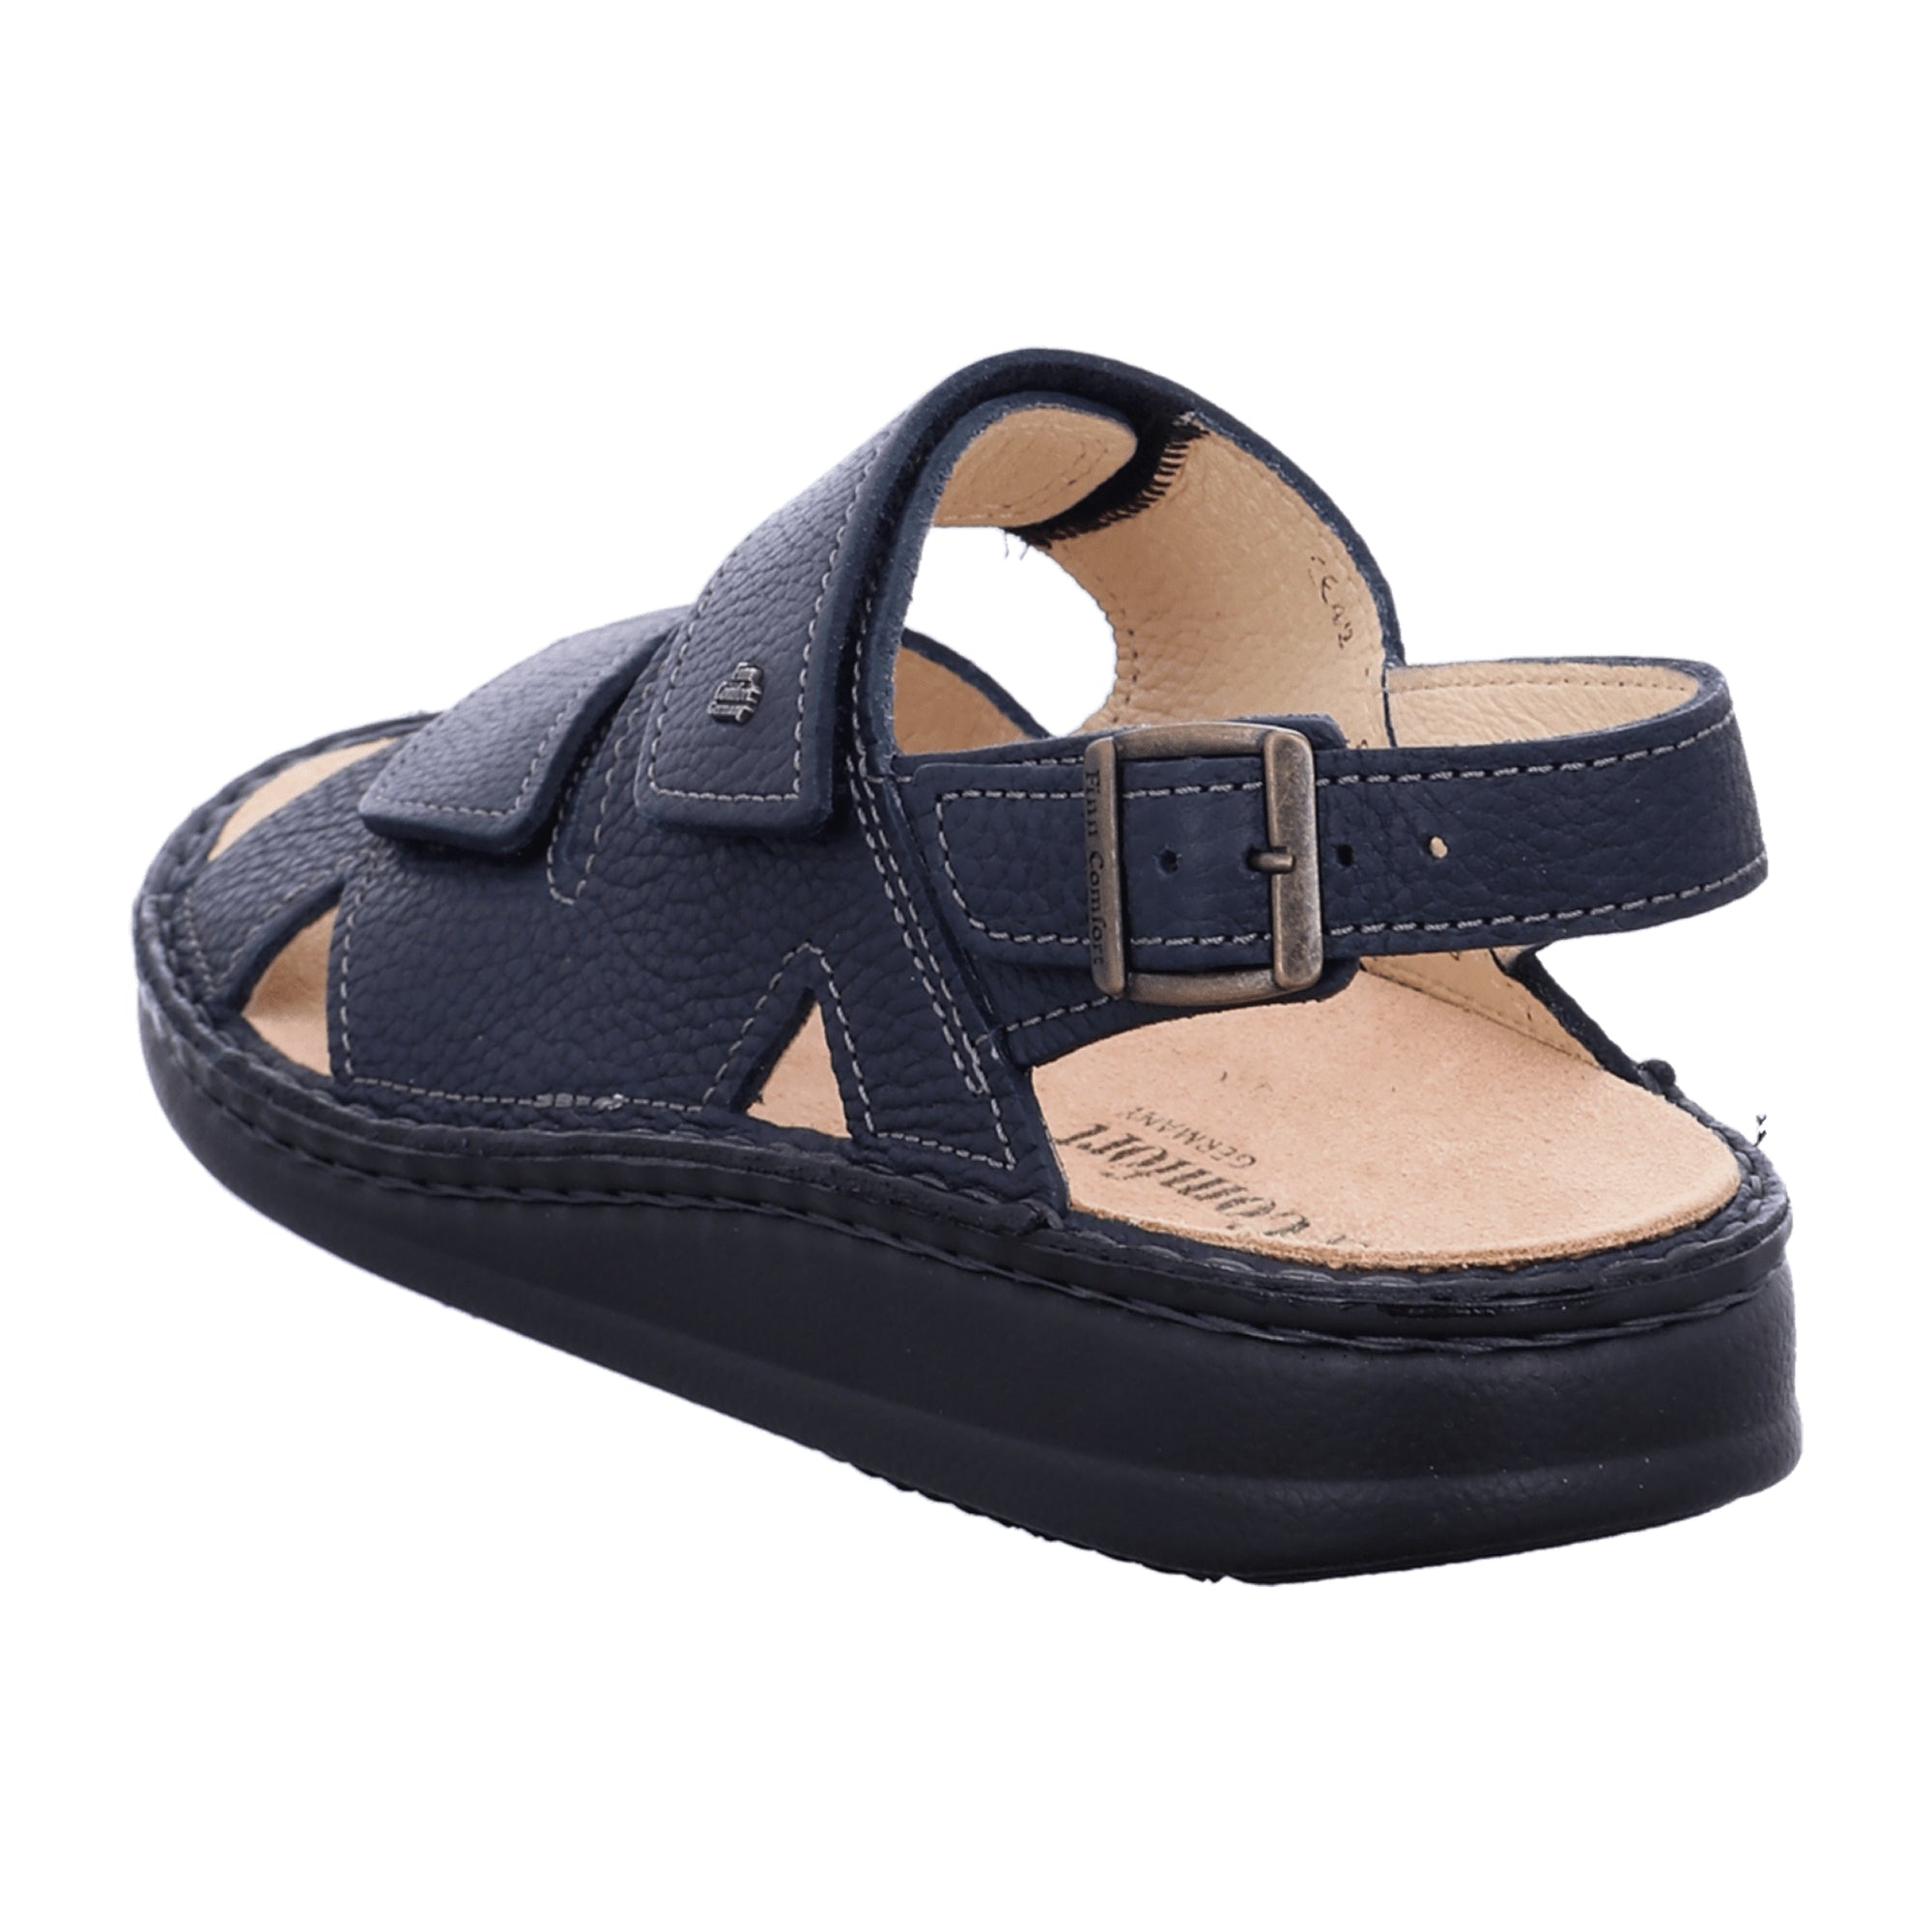 Finn Comfort Toro-Soft Men's Sandals - Night Blue Comfortable Leather Sandals with Adjustable Straps